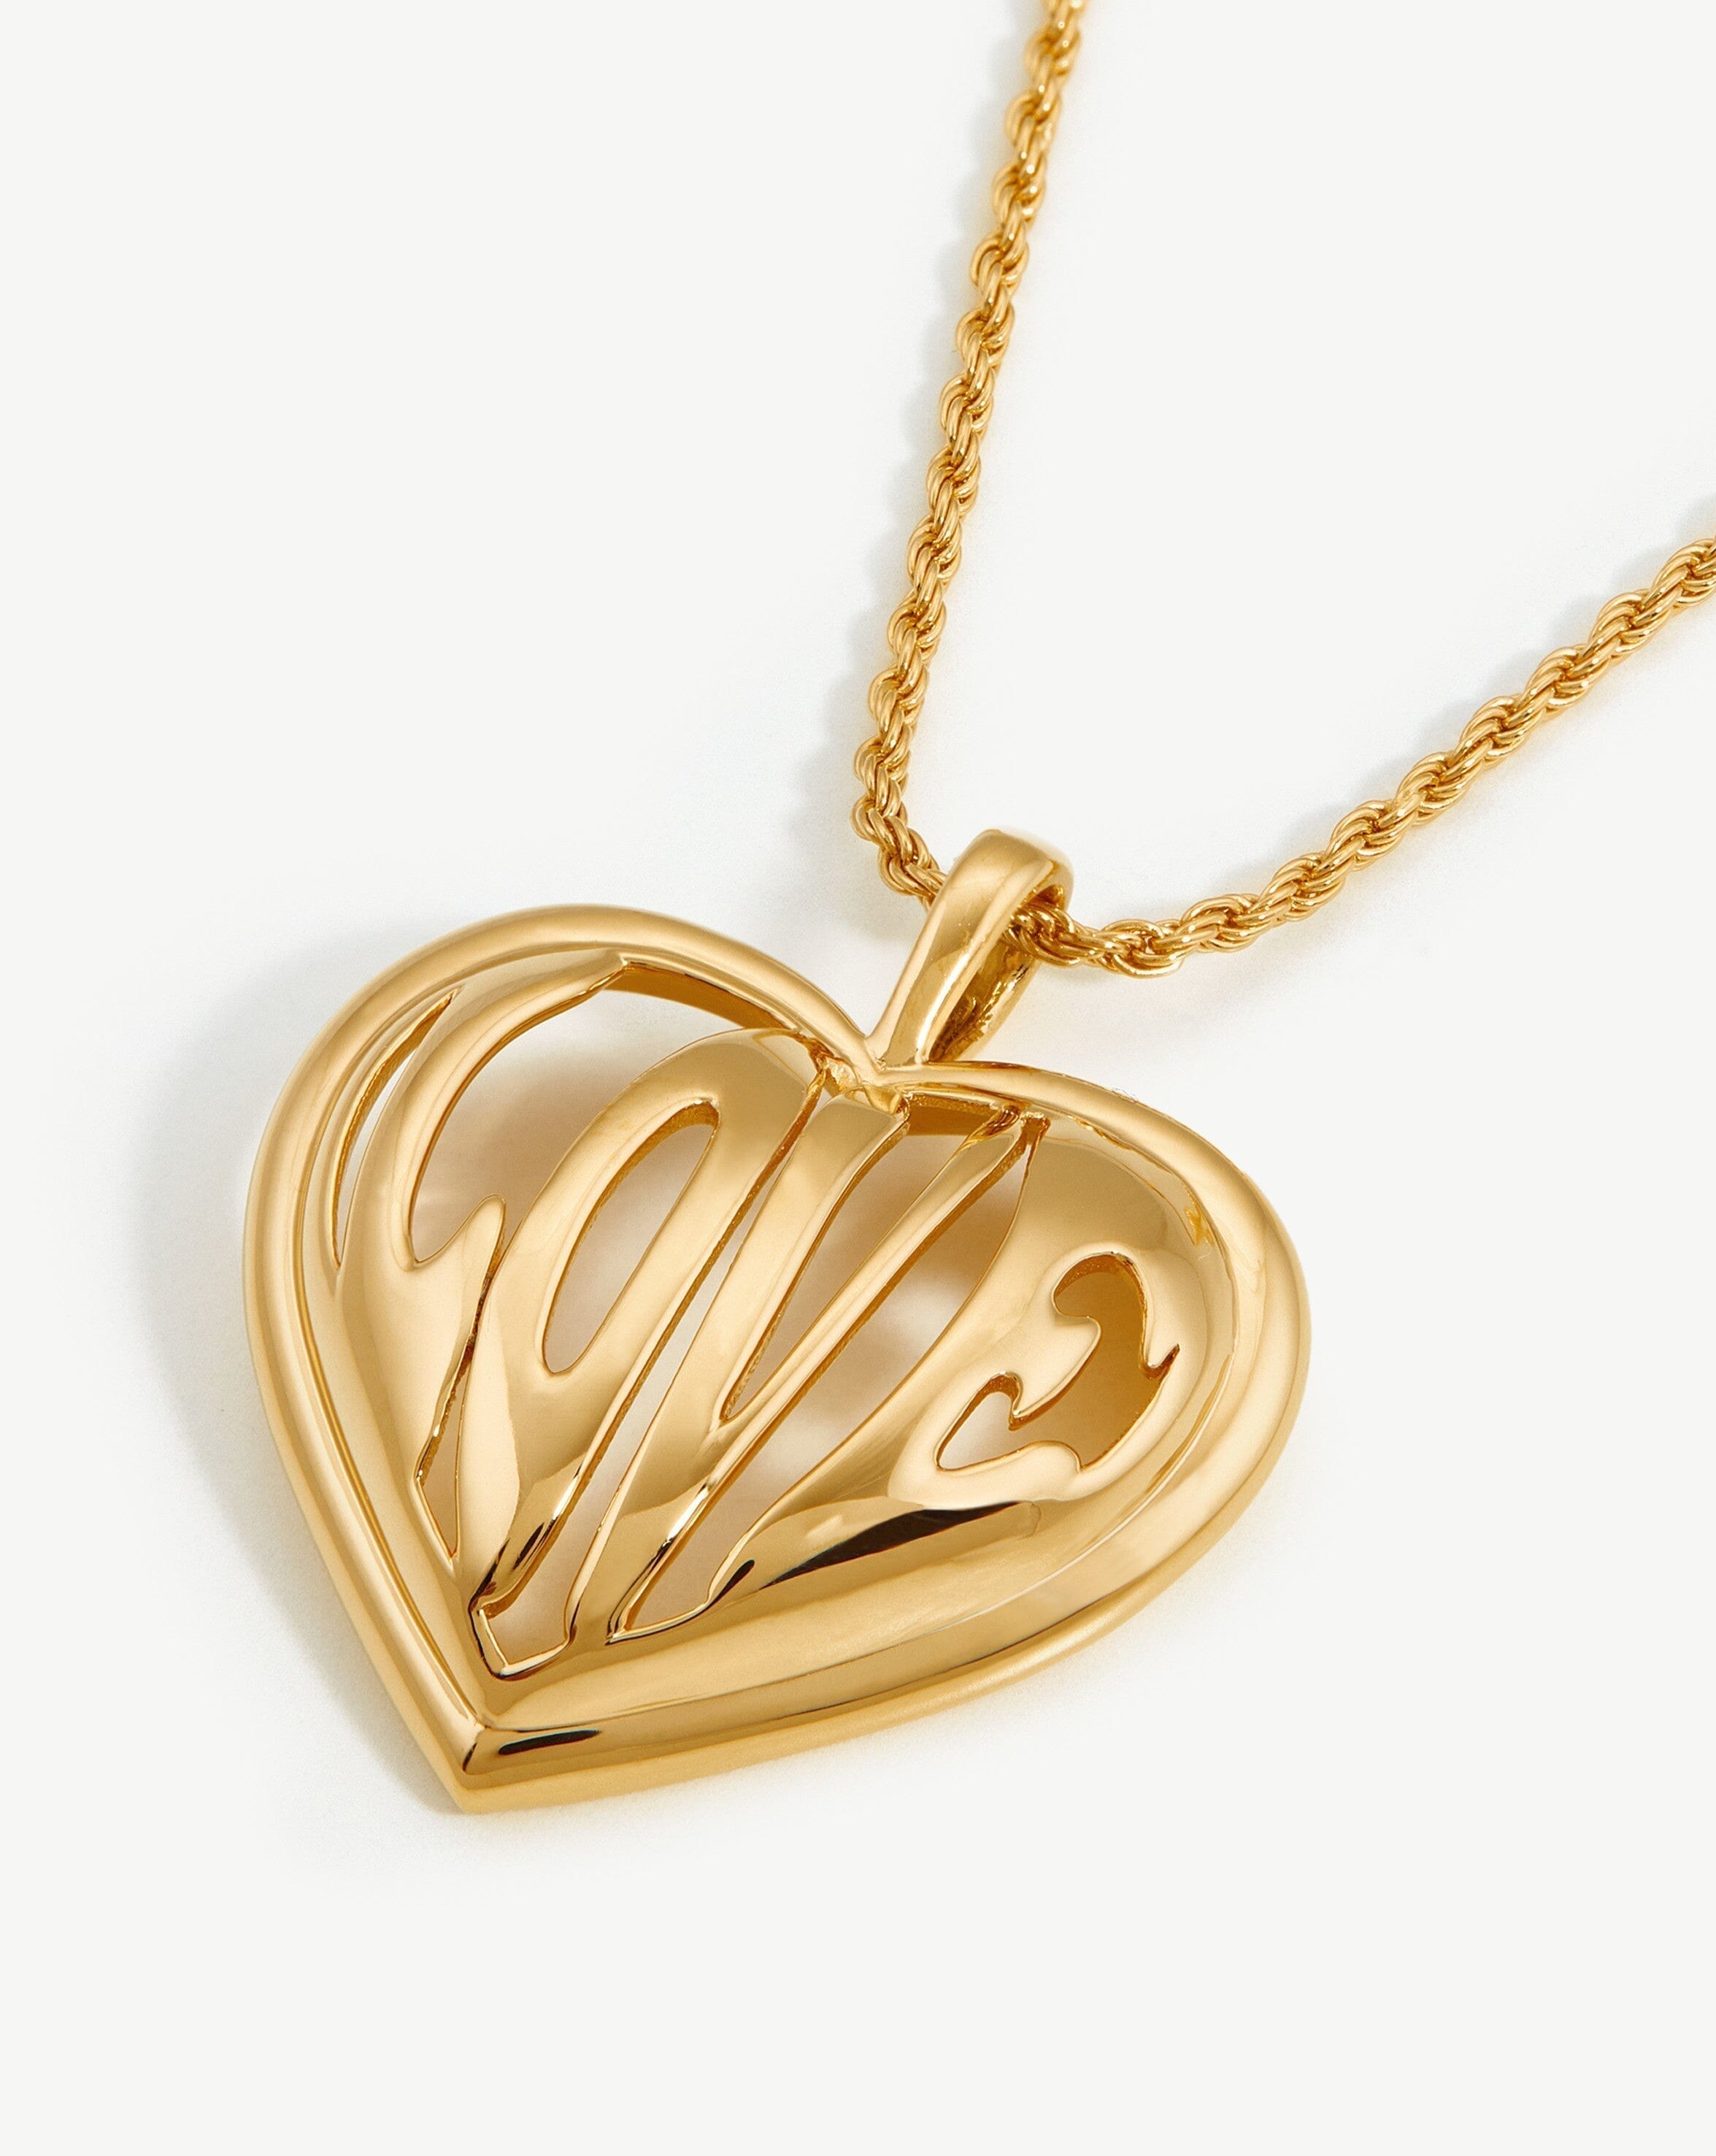 Padlock Heart Pendant Charm in 18ct Gold Vermeil on Sterling